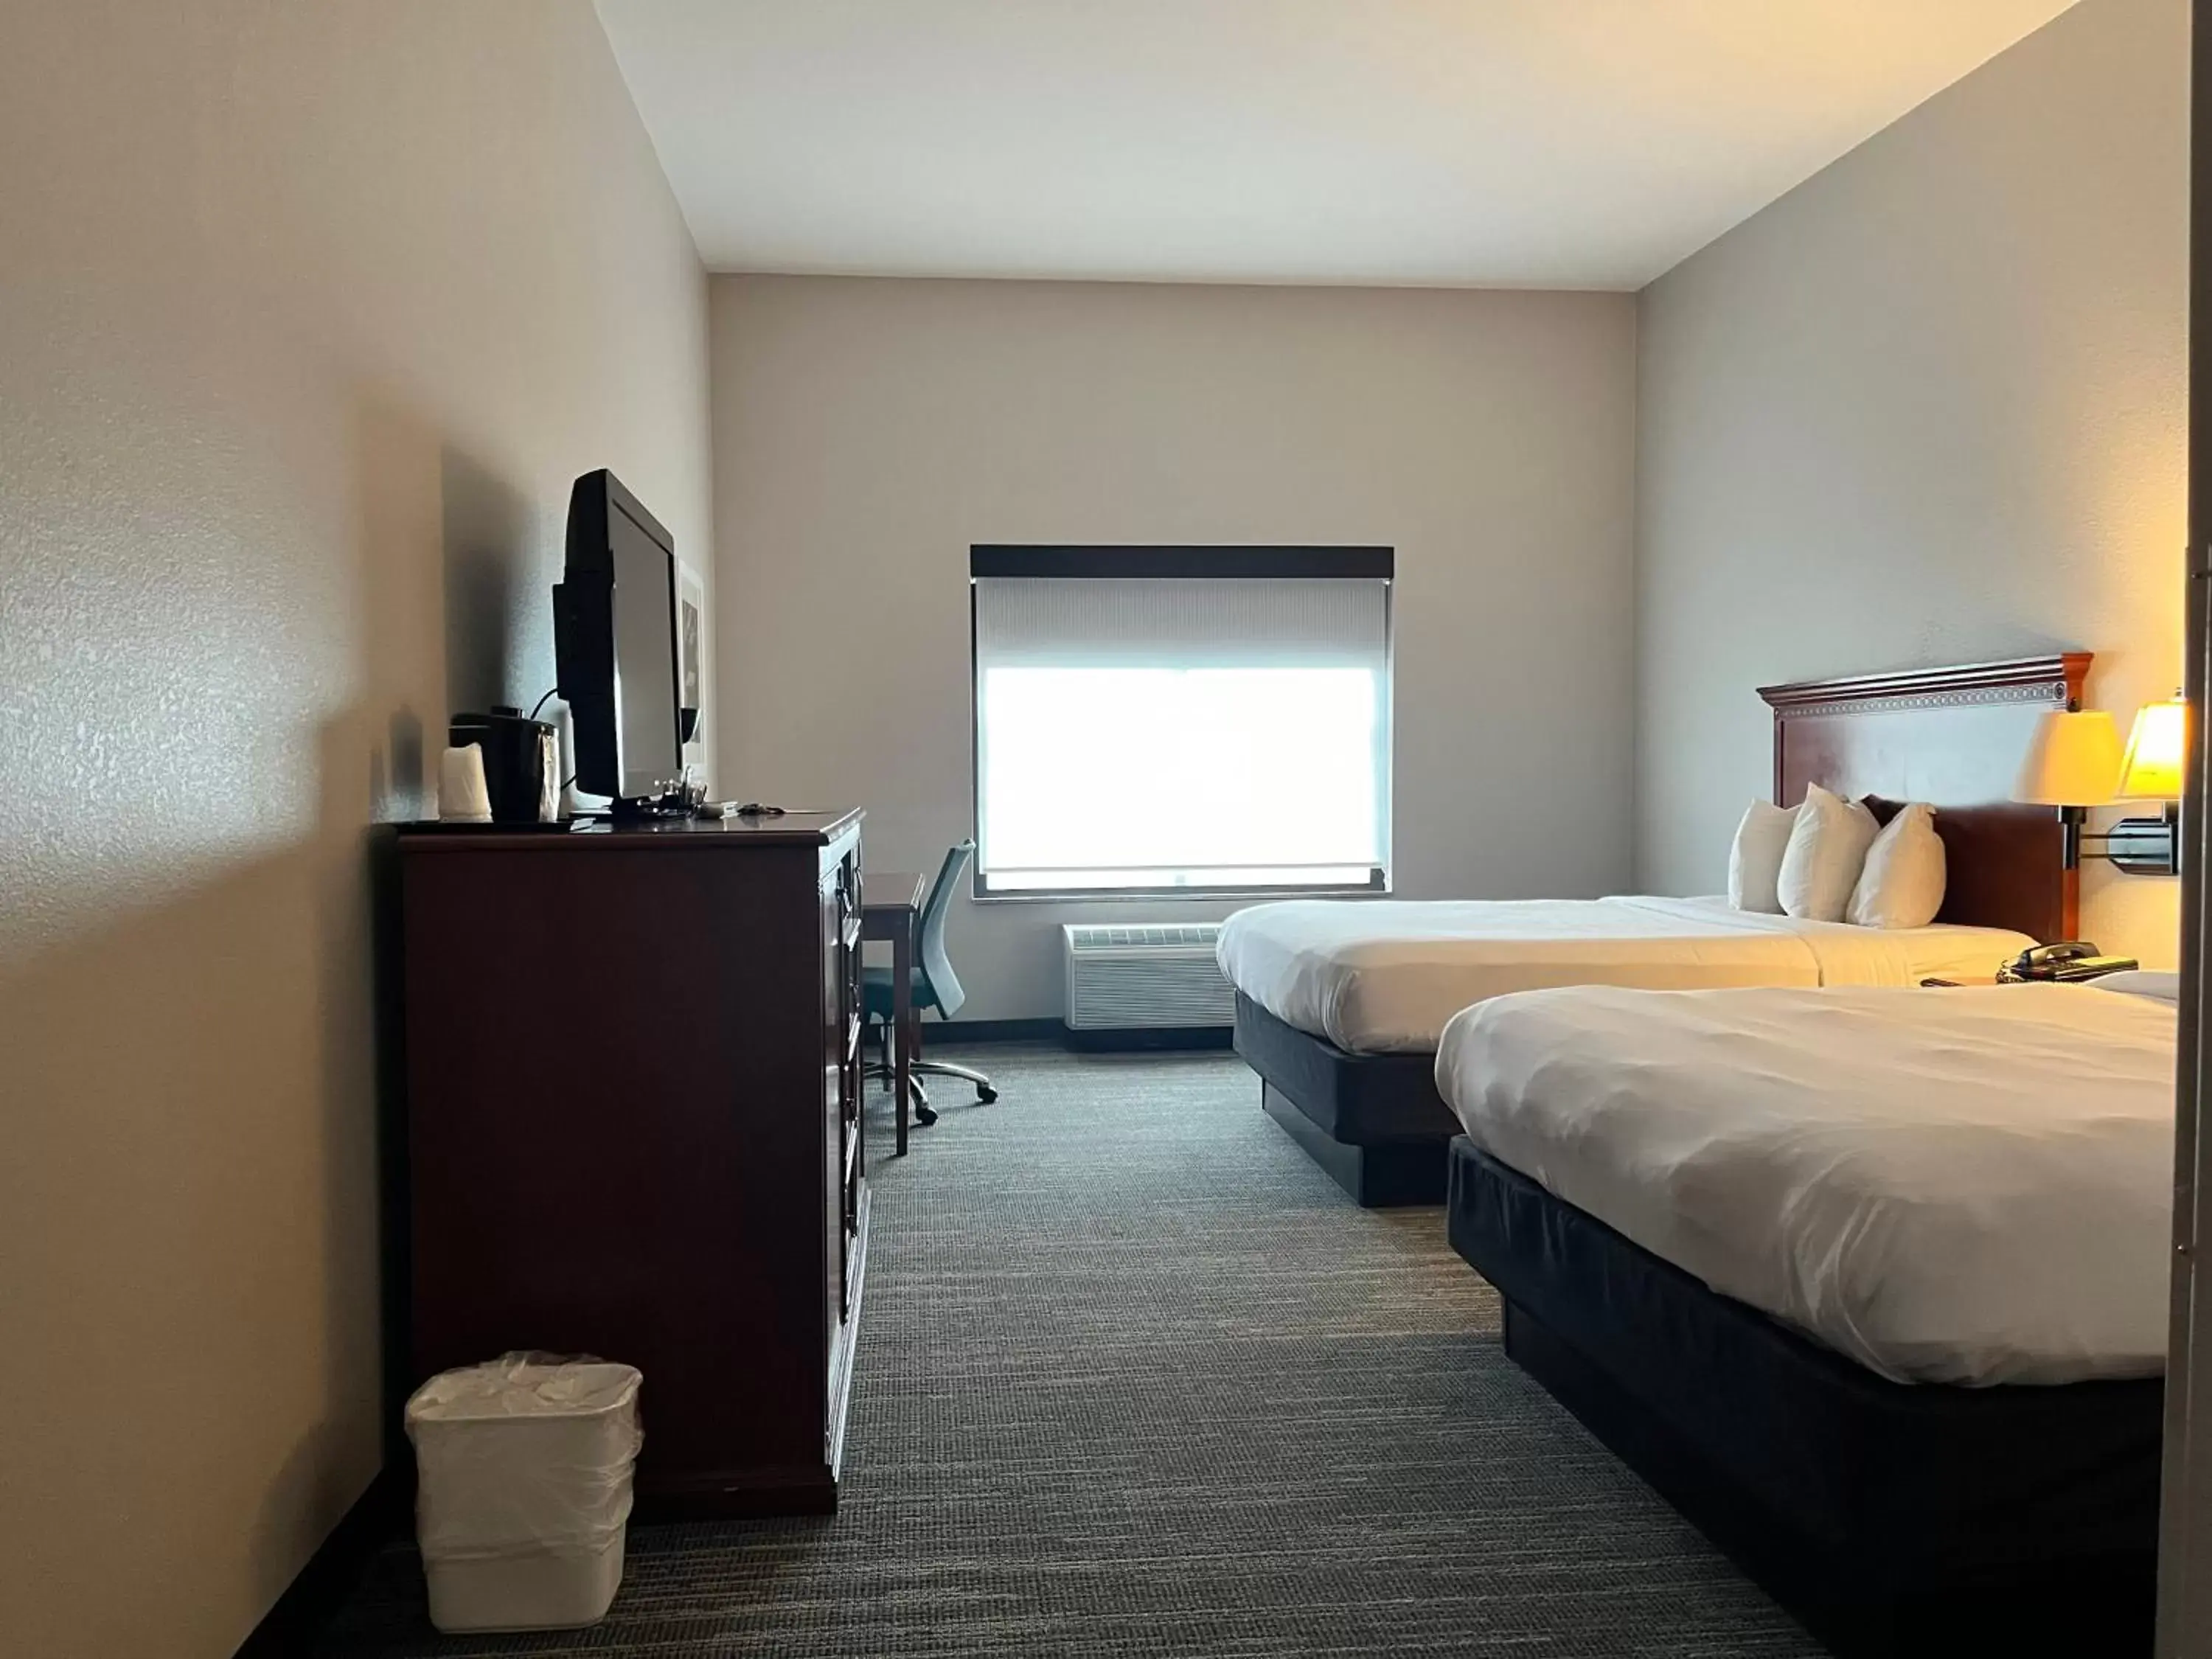 Country Inn & Suites by Radisson, Harrisburg - Hershey-West, PA